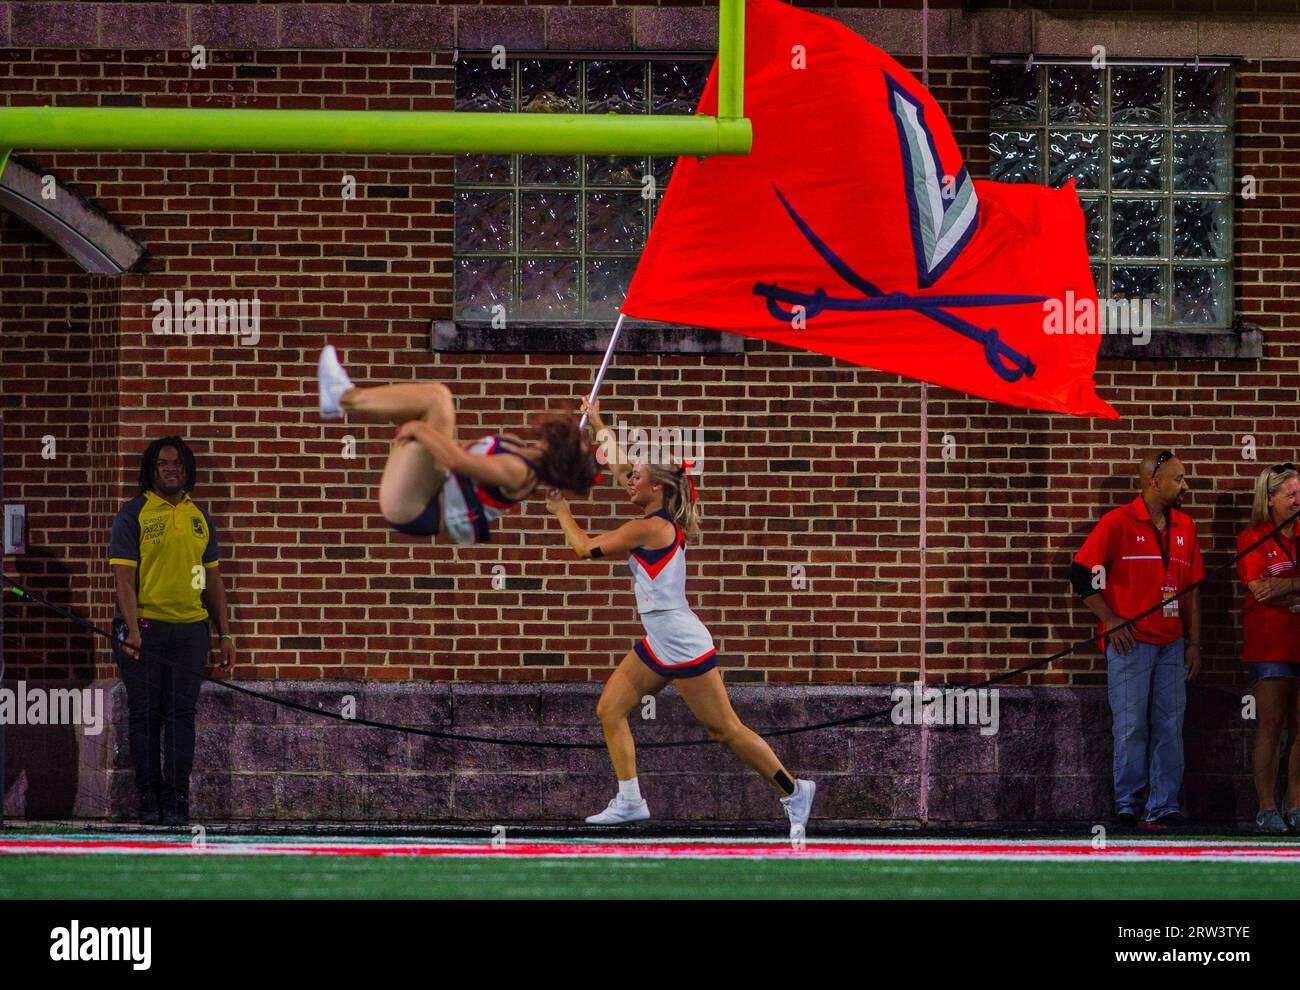 COLLEGE PARK, MARYLAND, USA - 15 SEPTEMBER : Virginia cheerleaders celebrate after a touchdown during a college football game between the Maryland Terrapins and the Virginia Cavaliers on September 15, 2023, at SECU Stadium in College Park, Maryland. (Photo by Tony Quinn-Alamy Live News) Stock Photo